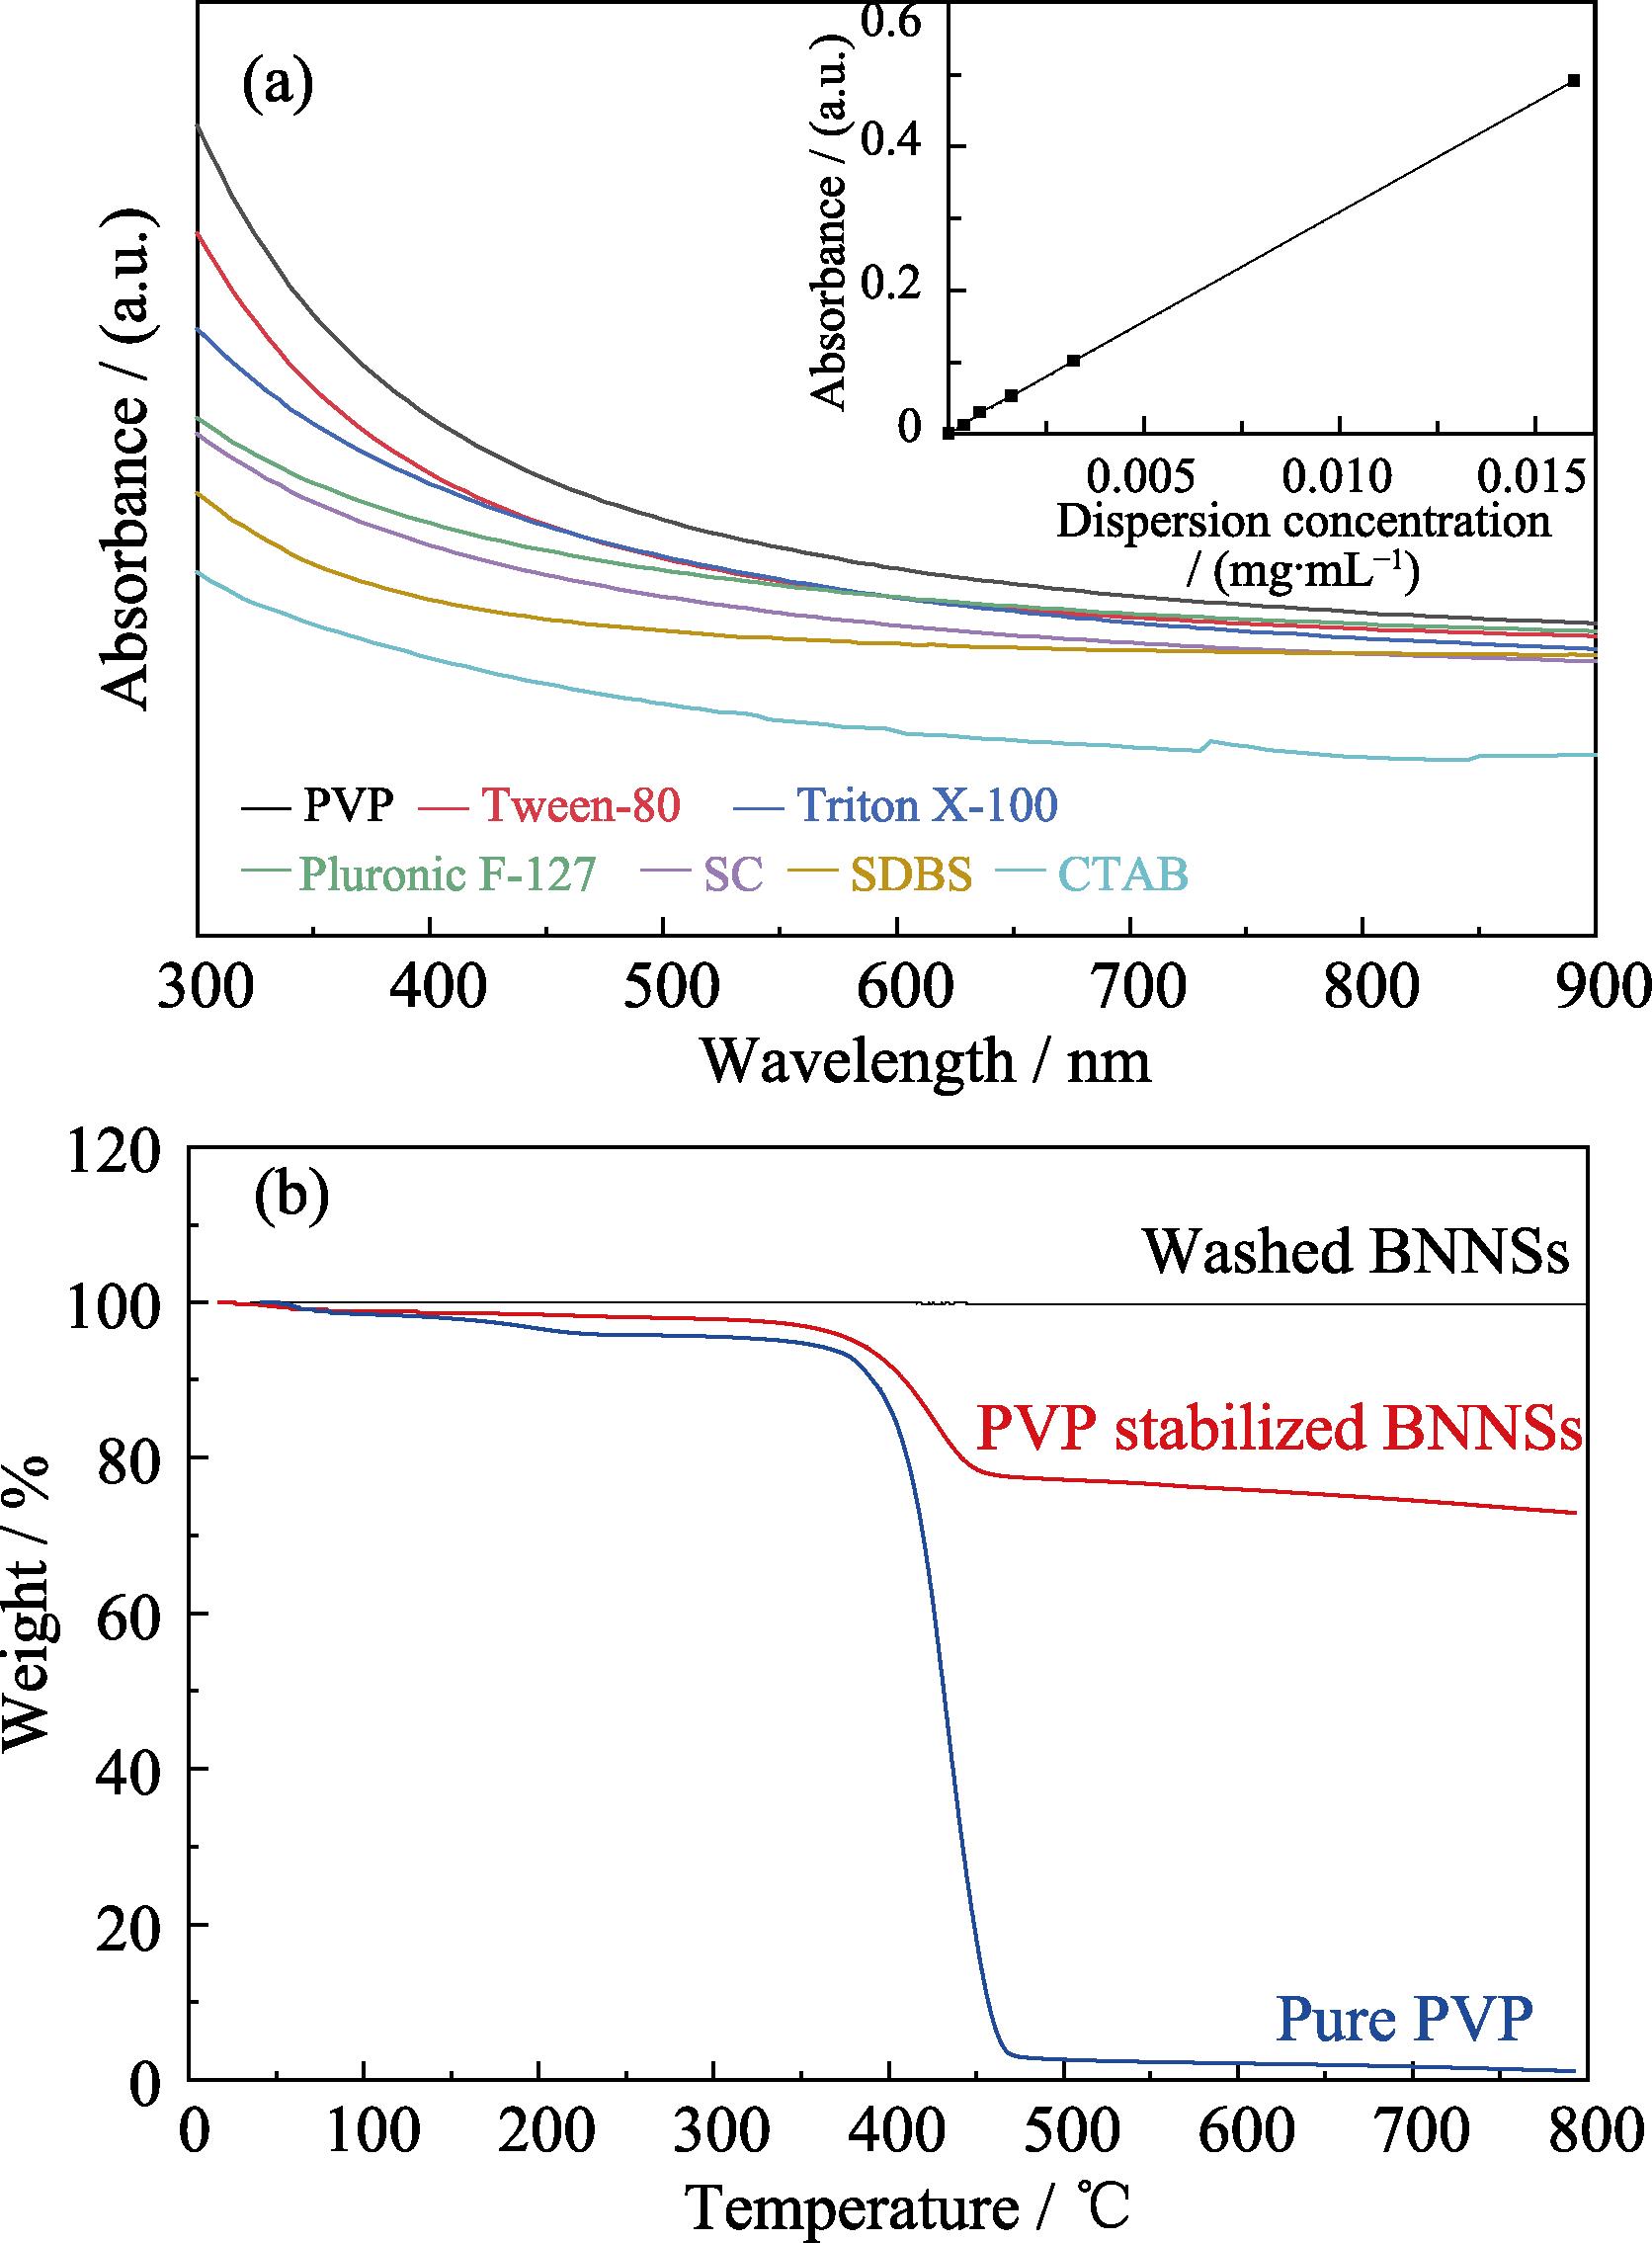 Absorption spectra for h-BN dispersions stabilized with various surfactants (a), TGA curves of washed BNNSs, PVP stabilized BNNSs, and pure PVP (b)